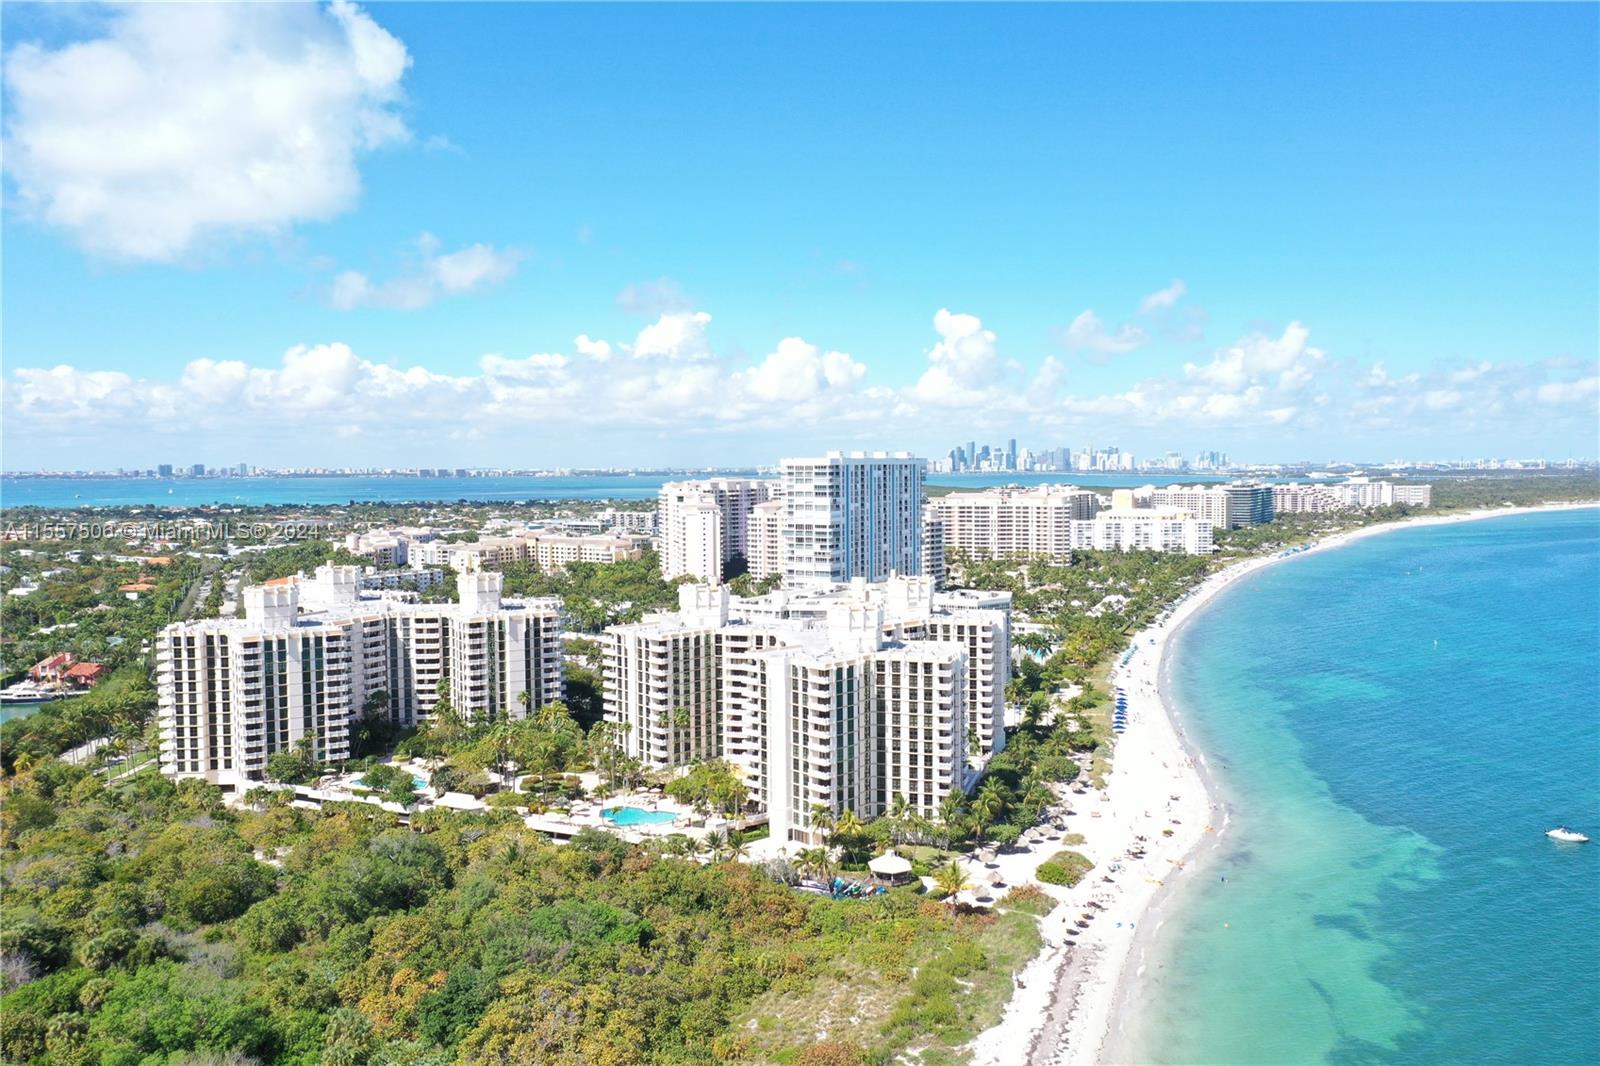 With an excellent location offering unobstructed views of Bill Bags State Park, this spacious corner unit, in very good condition, is situated within the desirable beachfront property of The Towers of Key Biscayne. This sought-after condominium provides direct access to the beach, along with umbrella and lounge chair services. Additionally, residents can enjoy amenities such as a gourmet restaurant, BBQ area, gazebo, playroom, two swimming pools, two tennis courts, a beauty salon, and a modern gym among others. It's truly a dream place to live with your family. Option to rent additional parking in the building (already rented).